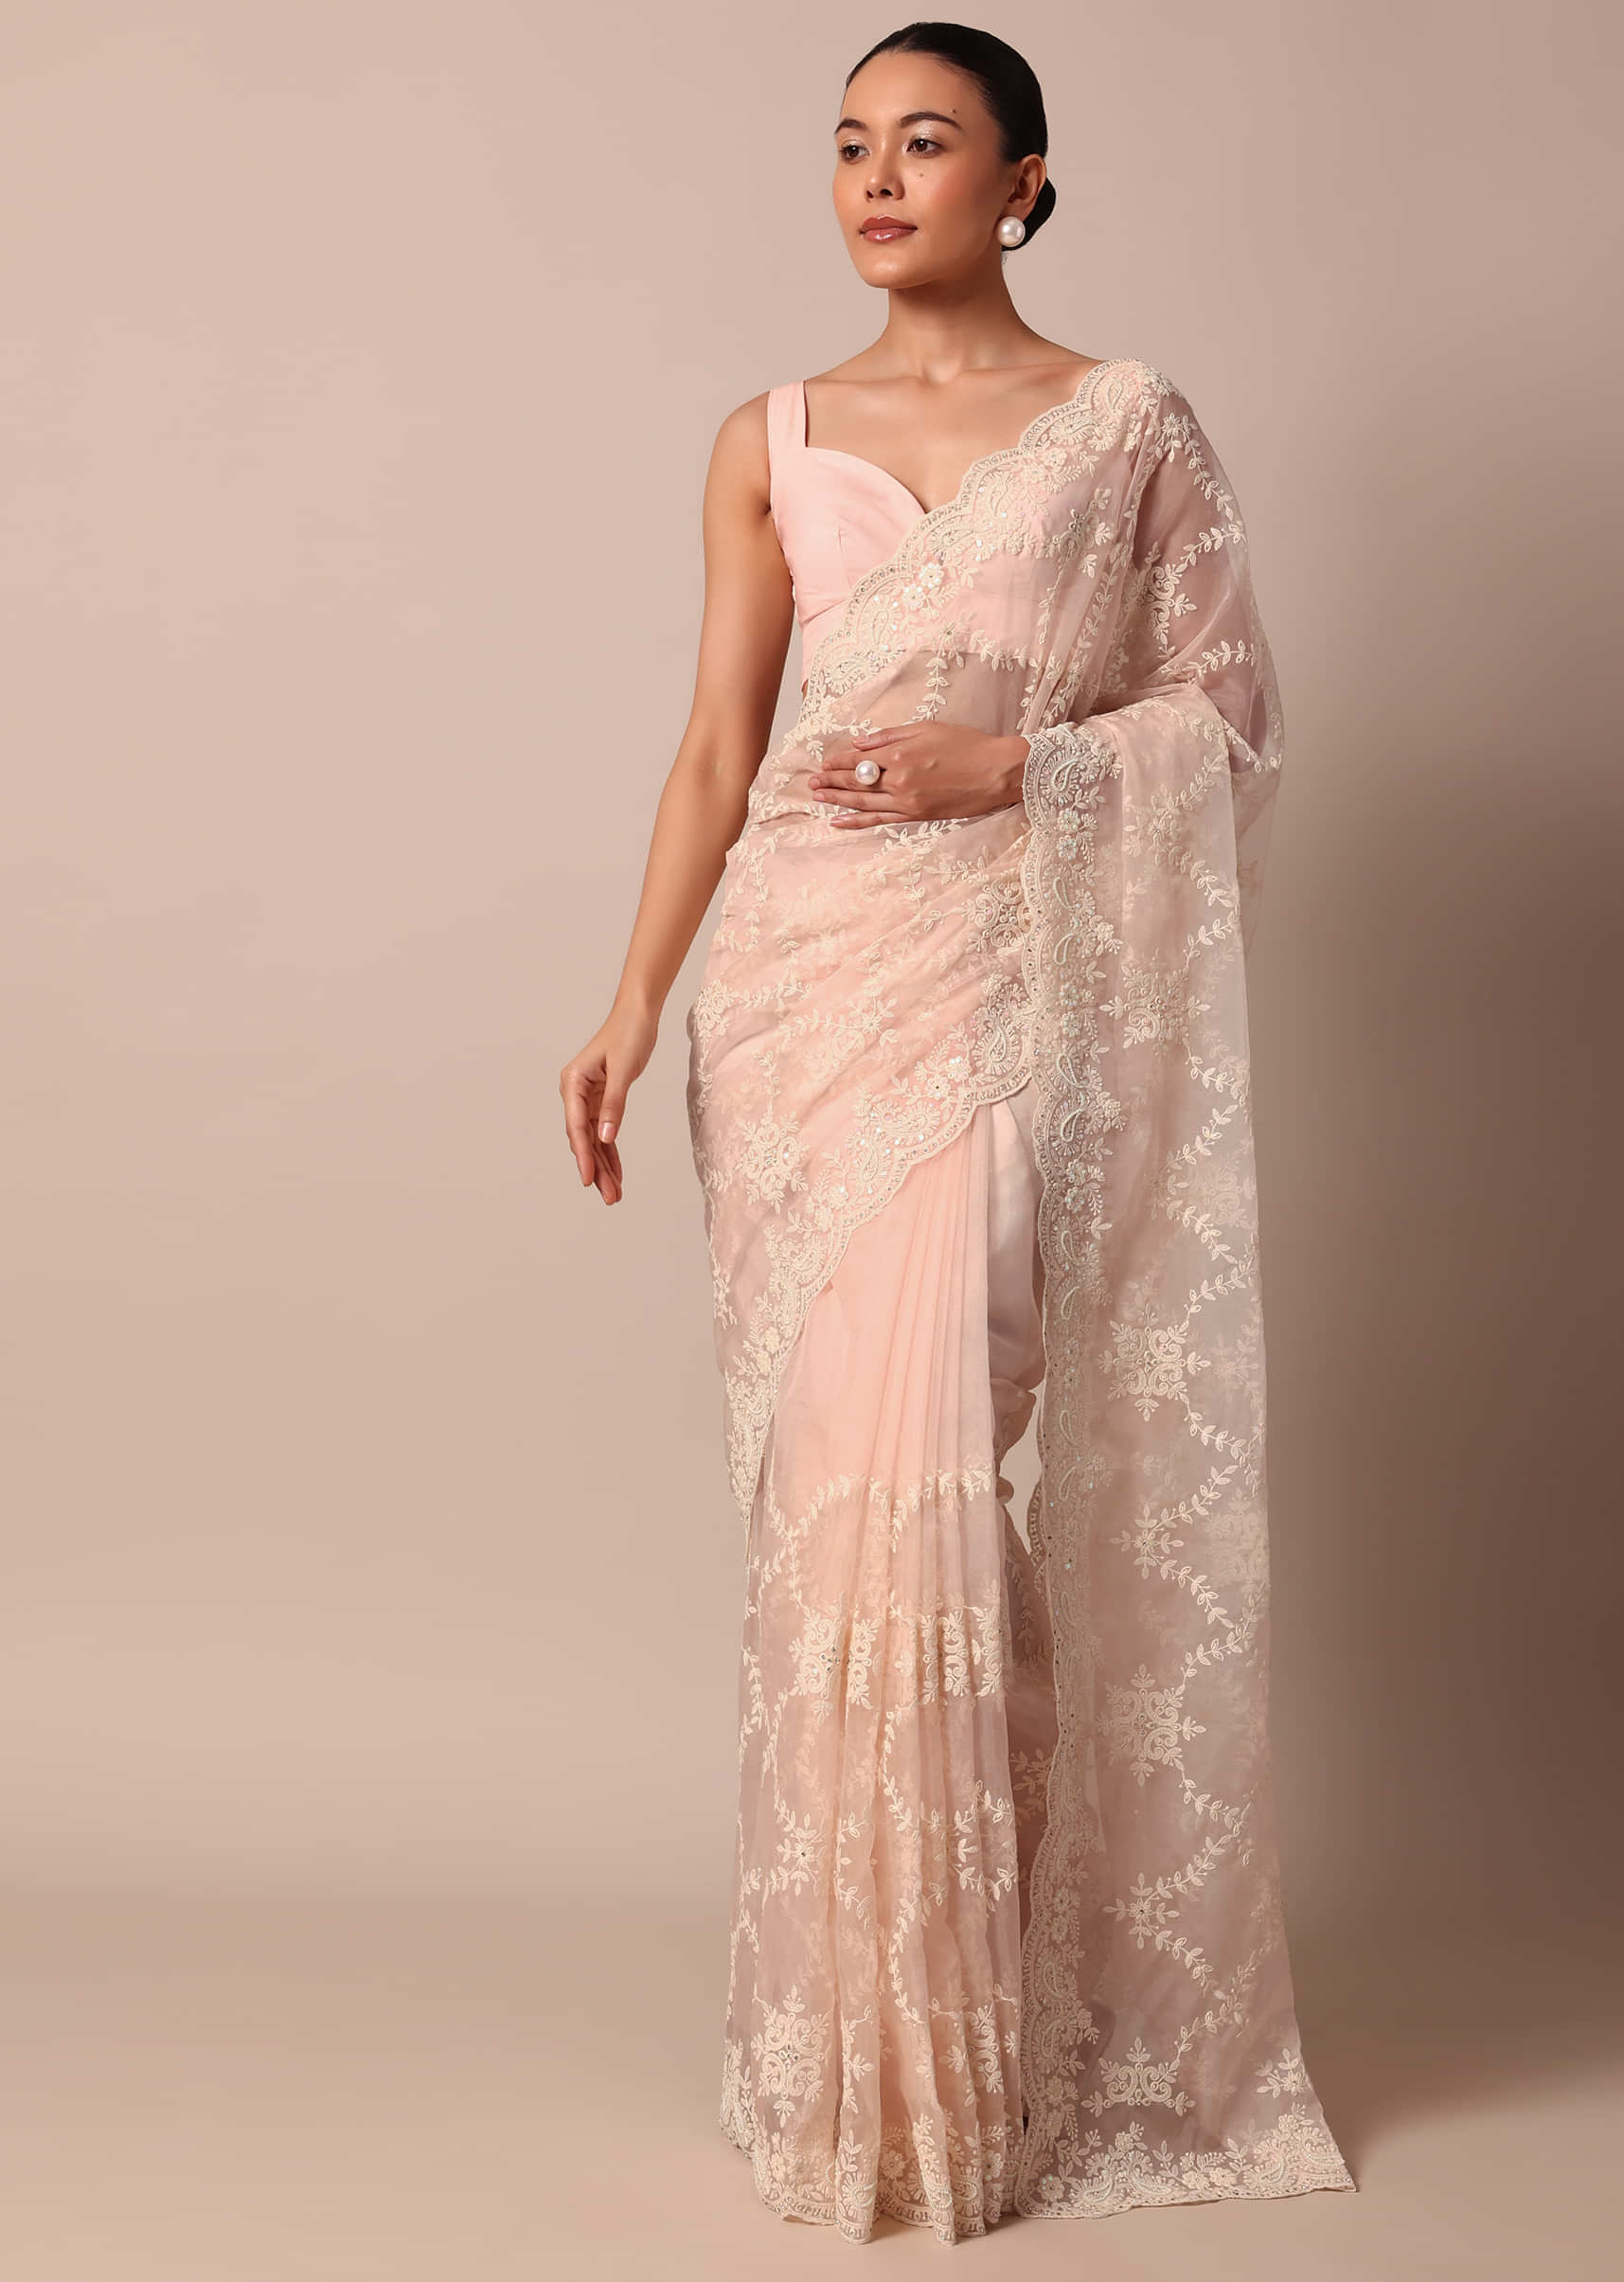 Best wedding sarees for women to buy in the USA, UK, Canad